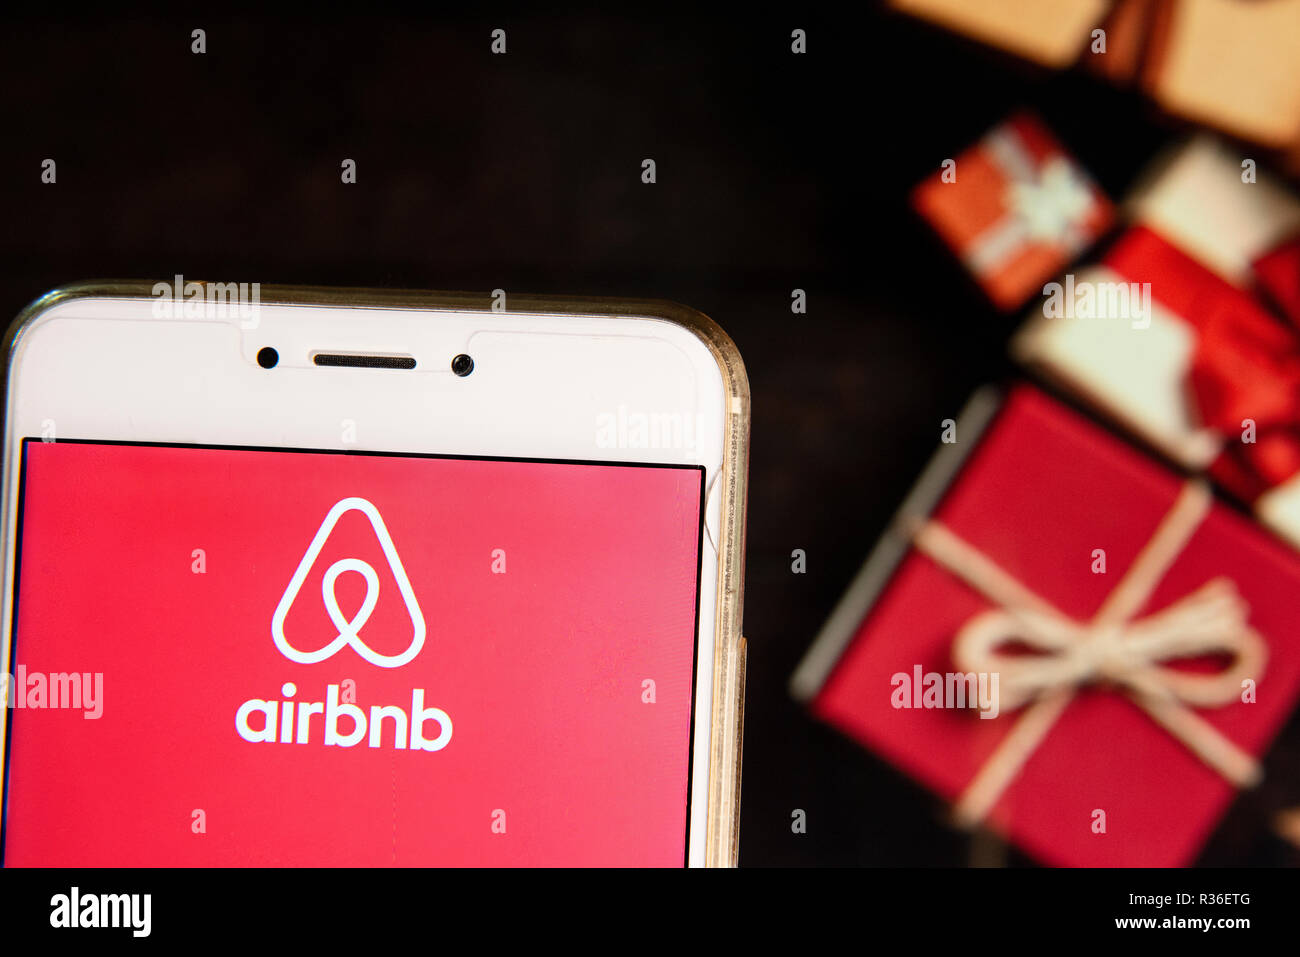 Airbnb Logo Stock Photos & Airbnb Logo Stock Images - Alamy